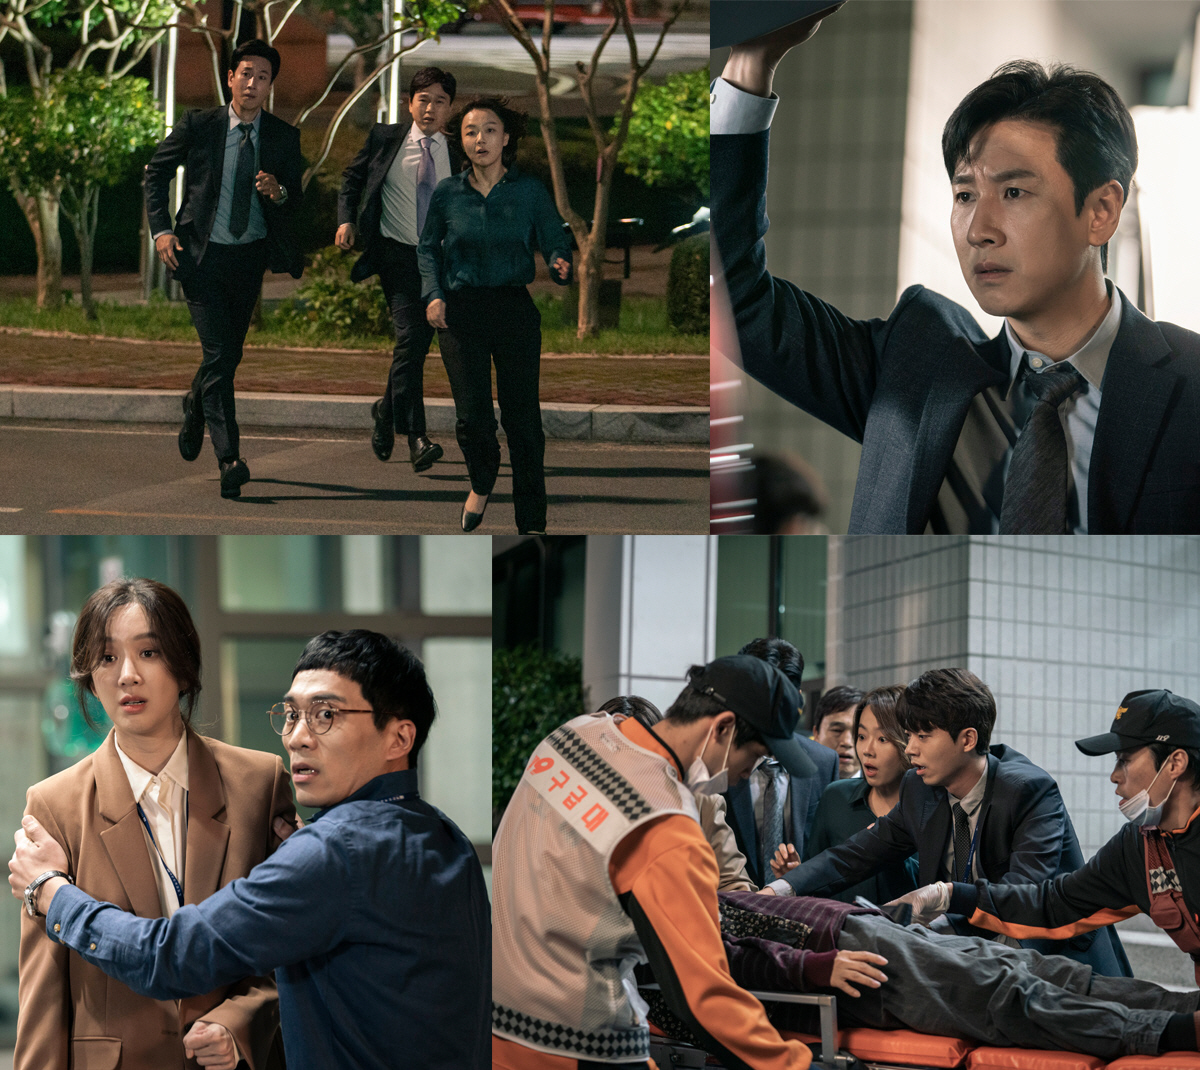 JTBC Prosecutor Civil War Office workers prosecutors are expected to run, and the background is highlighted.The Detective2 Department Office workers prosecutors who captivated viewers with their ordinary and soulful charm in JTBC Mon-Tue drama Prosecutor Civil War (director Lee Tae-gon, creator Park Yeon-sun, playwright Lee Hyun, Seo Ja-yeon, production Espis, total 16 episodes).Jinyoung Cheng, who is called the exile of prosecutors, and those who record second place in the year, and who are in the anger of Cho Min-ho (Lee Sung-jae), the head prosecutor, will run for some reason today (23rd).In this regard, the still cut released by the production team prior to the broadcast showed the prosecutors who were embarrassed.On a dark night, we can predict that something unexpected crisis occurred to them in the face of Lee Sun-woong (Lee Sun-gyun), who rushes in front of Ji Cheng, and looks into Ambulance with a serious expression, and Cha Myung-ju (Jung Ryeo-won), who was caught by Lee Jung-hwan (Ahn Chang-hwan)Above all, the last still cut that was released was captured by paramedics transporting someone on a stretcher.Who is the one who fell on the stretcher, what story is intertwined, and the story of the Detective 2 family rushing in the middle of the night.In the peaceful and quiet local city of Jinyoung, I am curious about what other episodes the Office workers prosecutors who seem to be unwinding for a single day will produce.I am grateful to the viewers who watched Prosecutor Civil War with a keen interest from the first week of broadcasting, said the production team of Prosecutor Civil War. I would like to ask for your expectation because there will be various episodes that will give small but pleasant fun, including the relationship between Sunwoong and Myeongju,Prosecutor Civil War 3rd, Monday night, 9:30 p.m., JTBC broadcast.